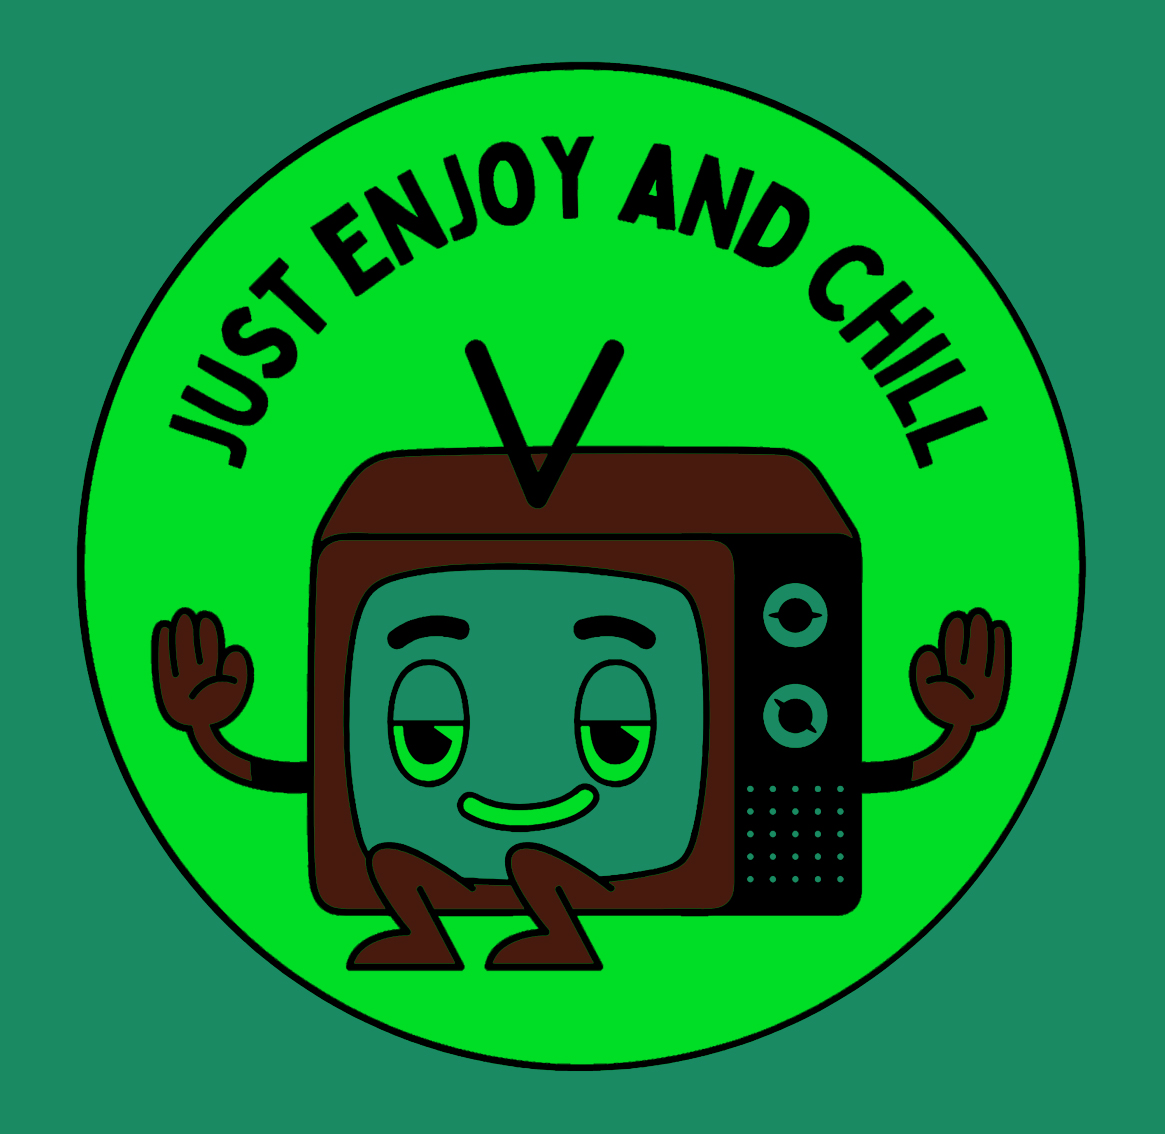 Printed Colour Example for Fluorescent Green Paper Sticker, retro tv, printed WITHOUT White Underlay. Artwork: Canva